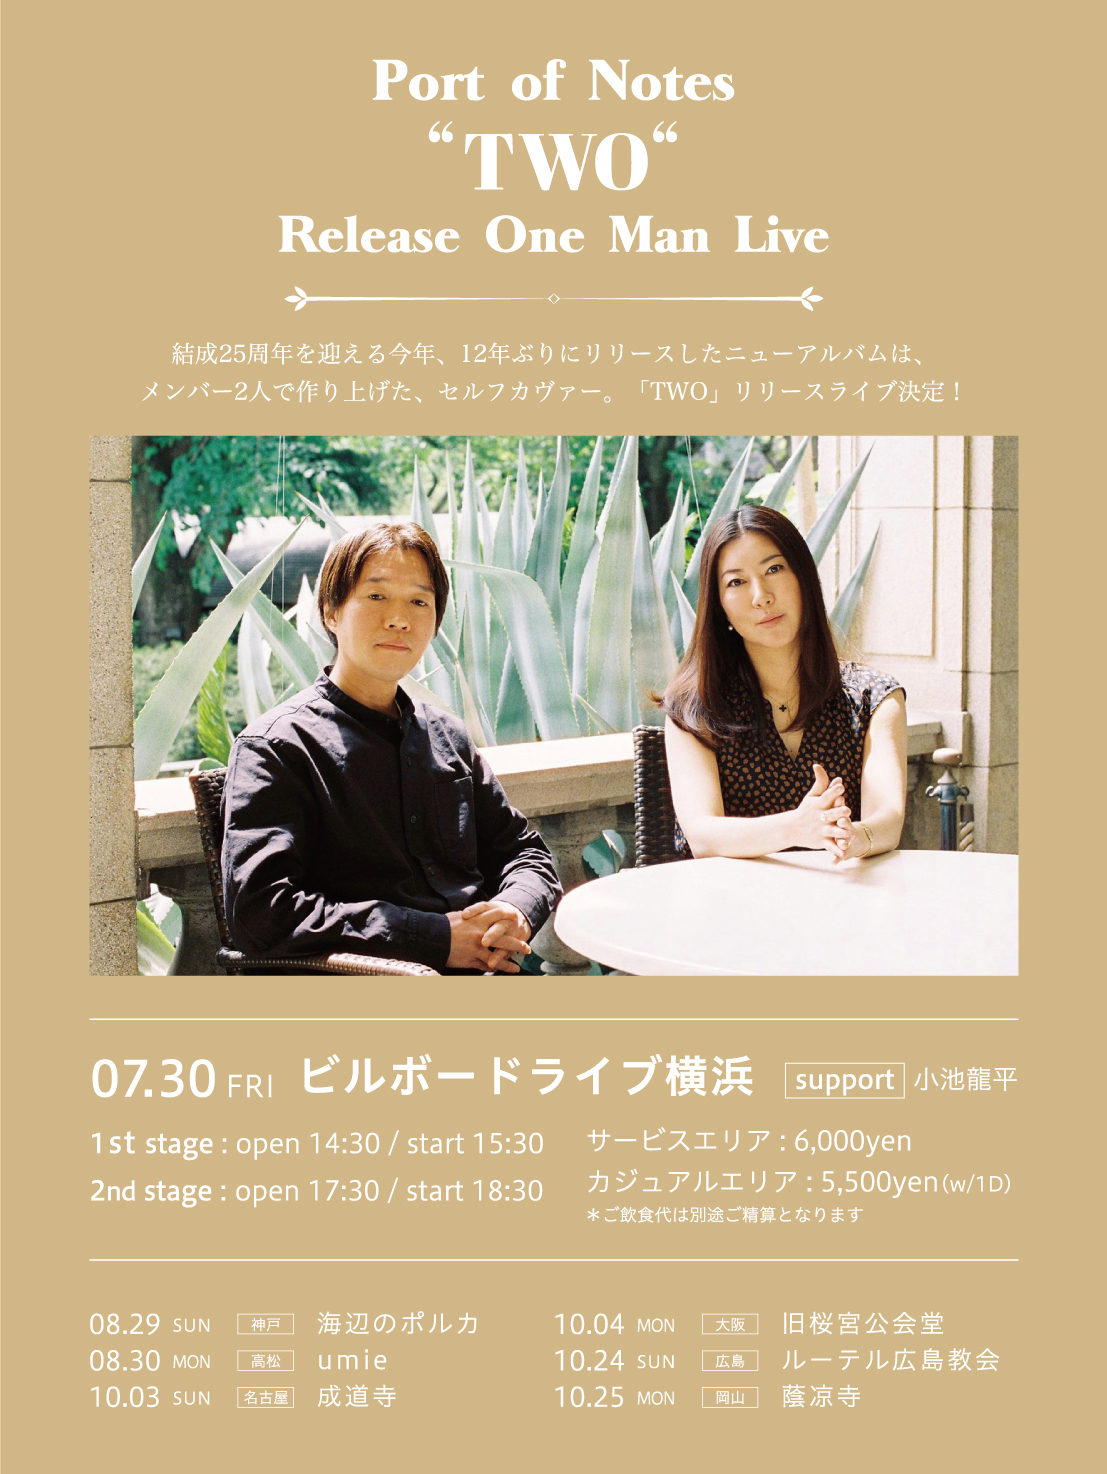 Port of Notes 「TWO」 Release One Man Live | Port of Notes